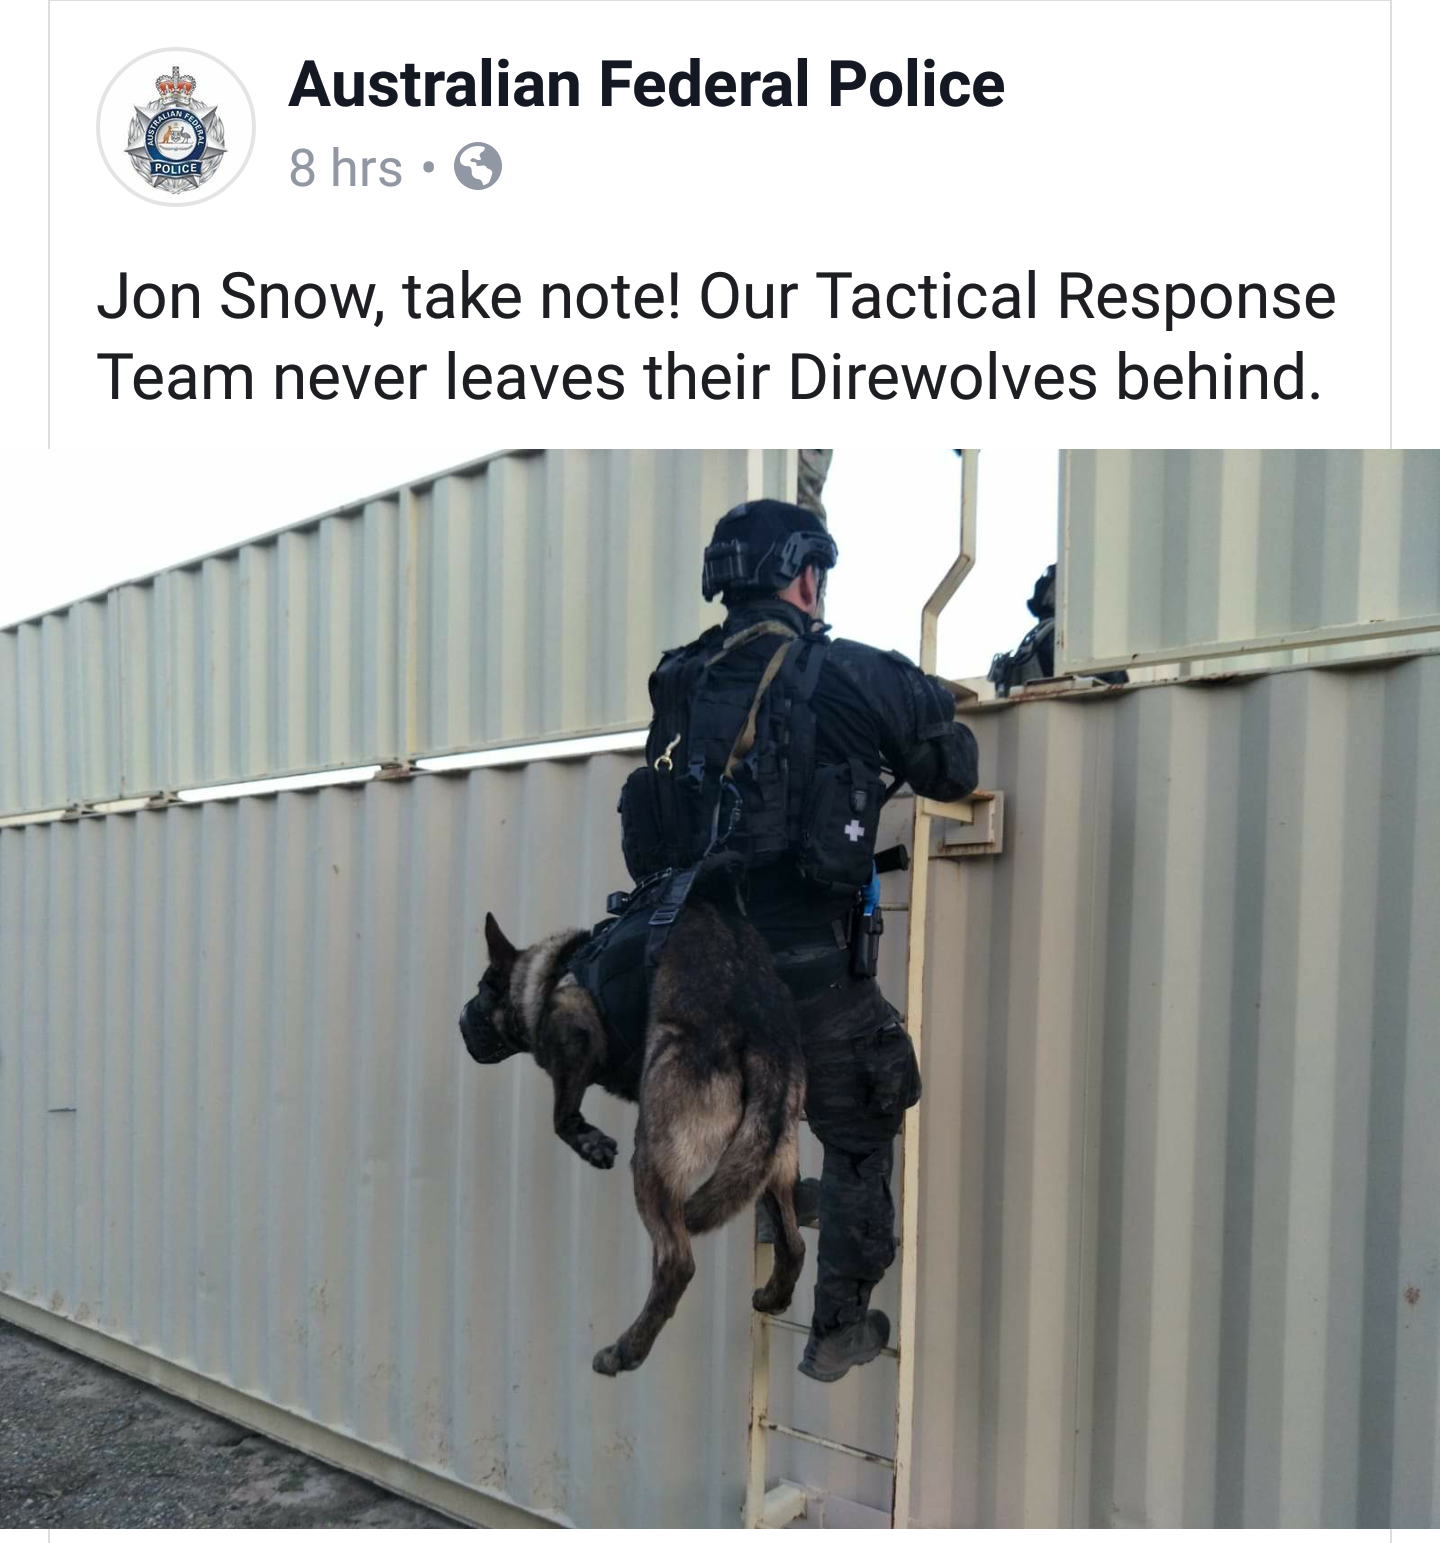 australian federal police - Australian Federal Police 8 hrs. Jon Snow, take note! Our Tactical Response Team never leaves their Direwolves behind.